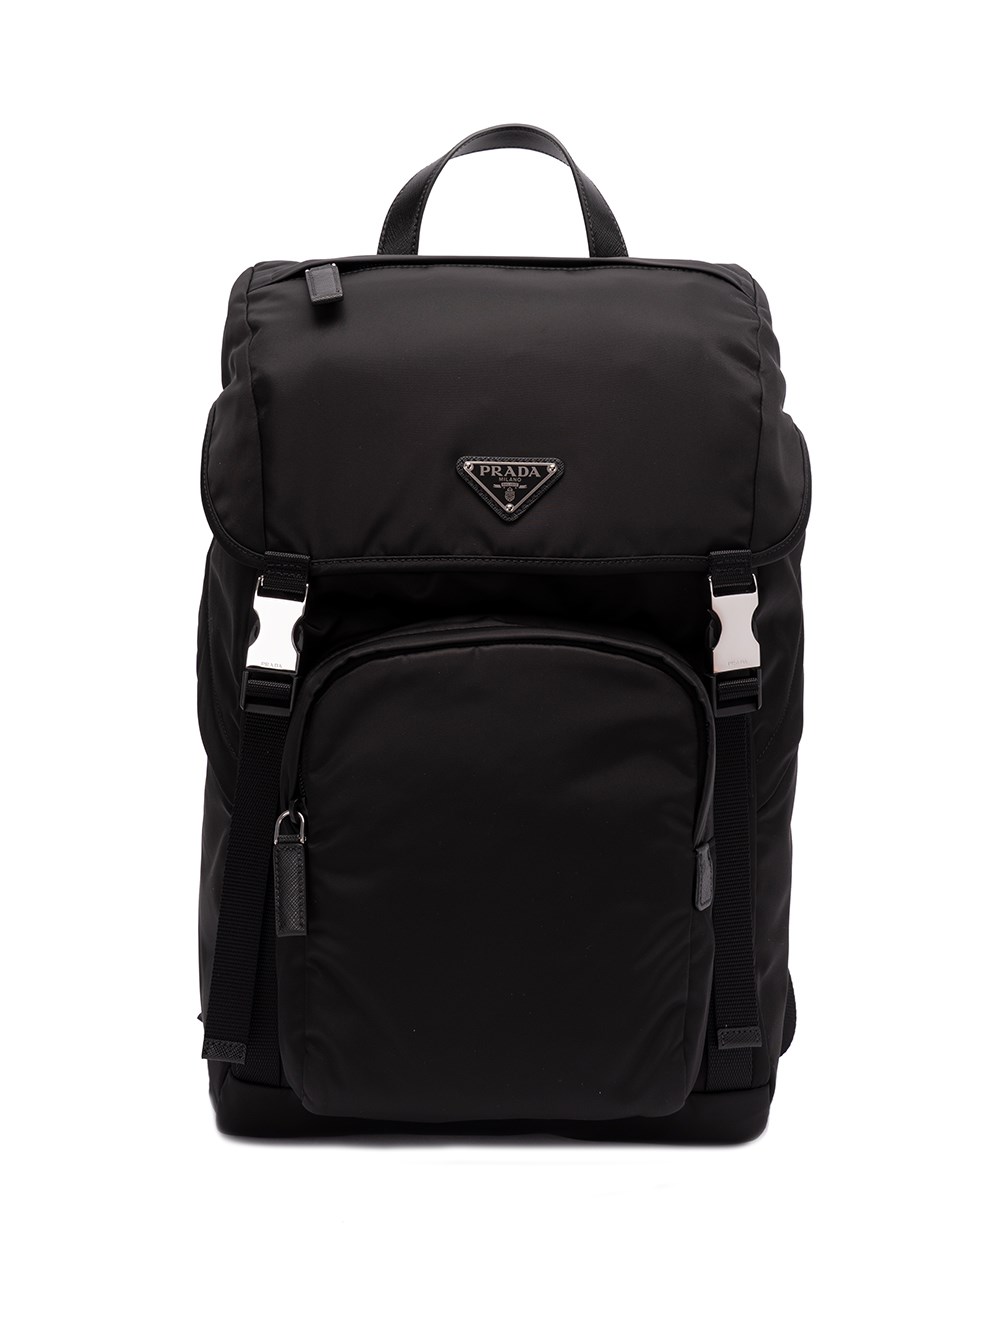 Prada `re-nylon` And Saffiano Leather Backpack In Black  